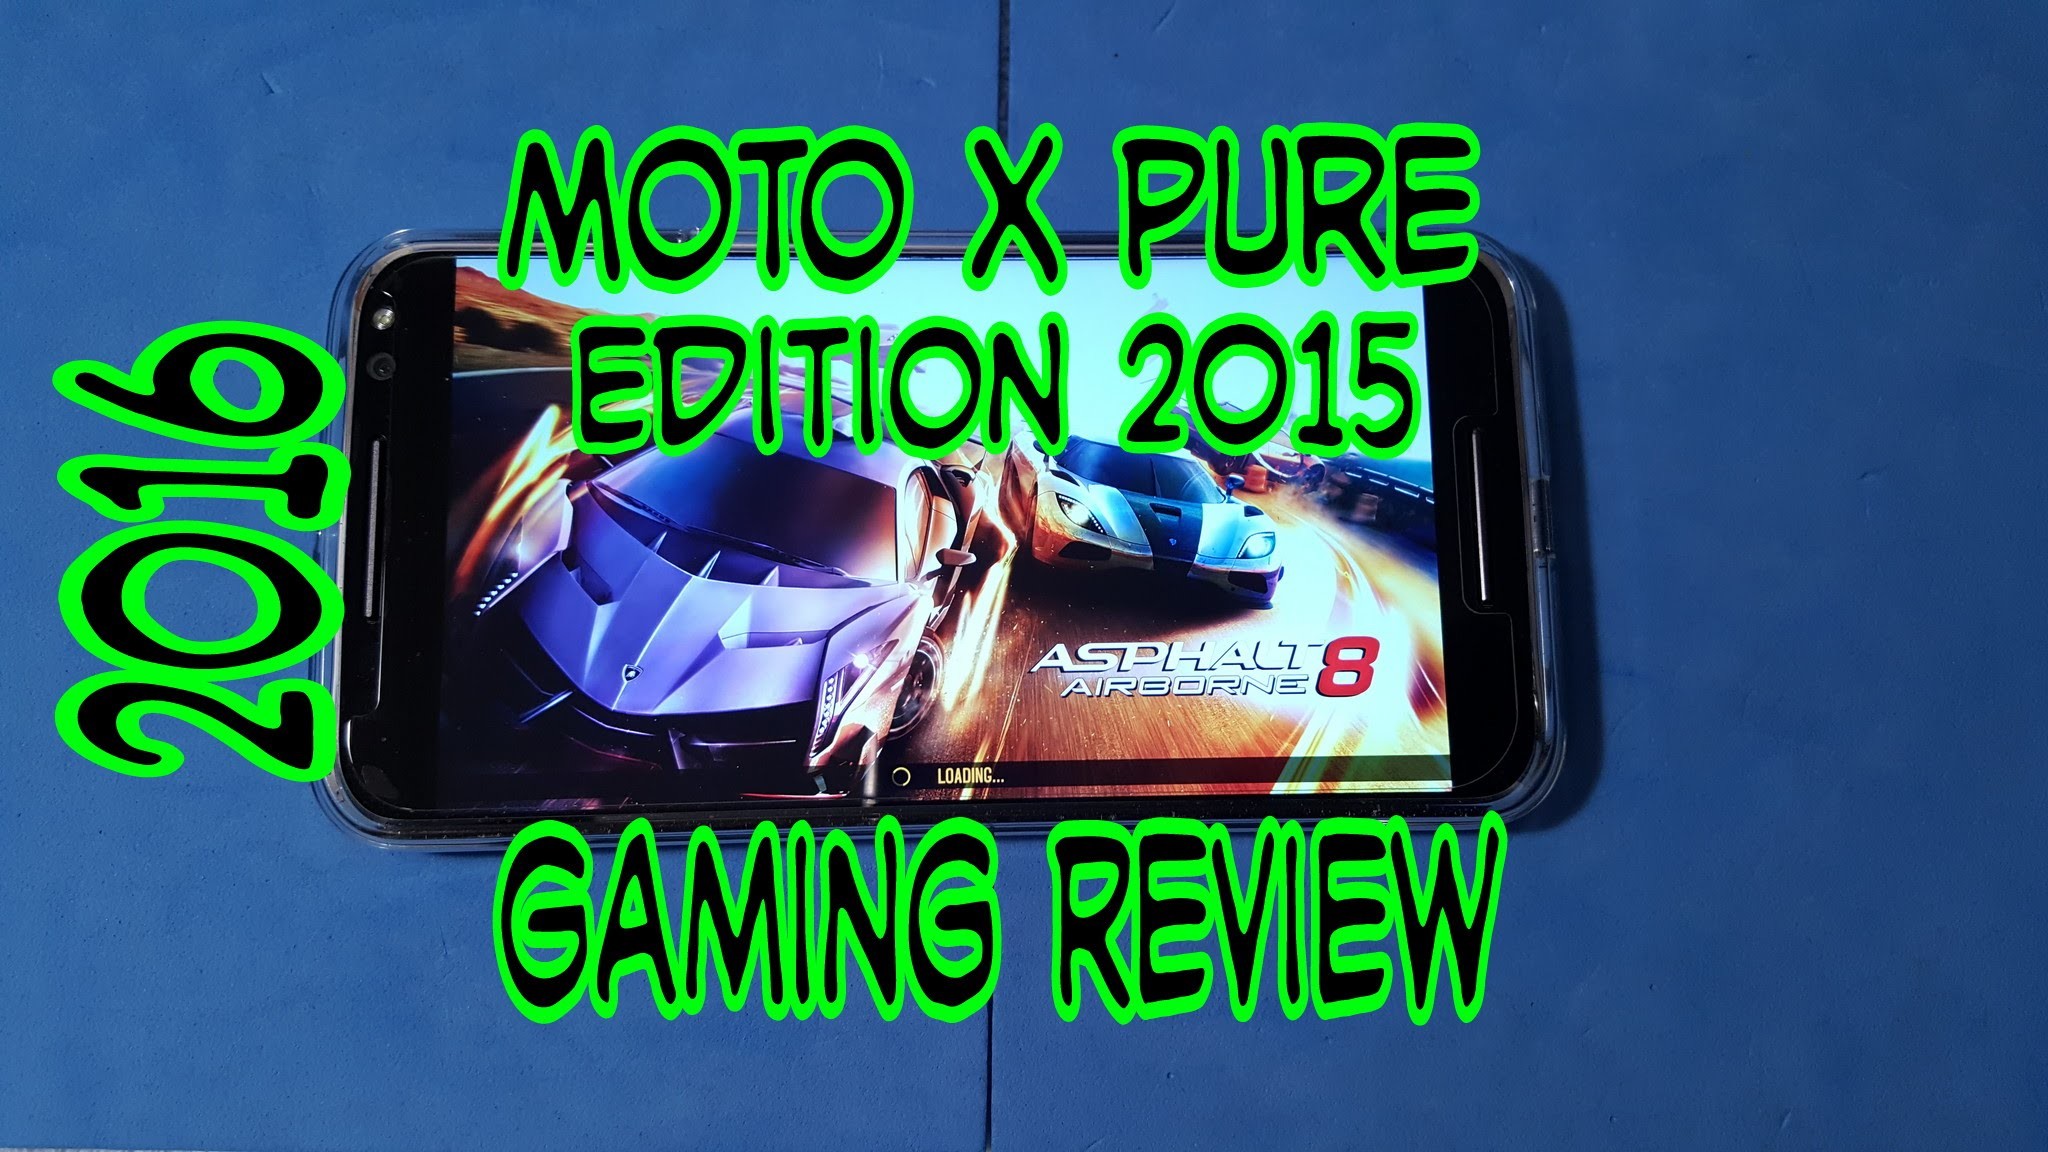 2048x1152 Moto X Pure Edition 2015 Gaming Review |Performance & Heat Test 2016